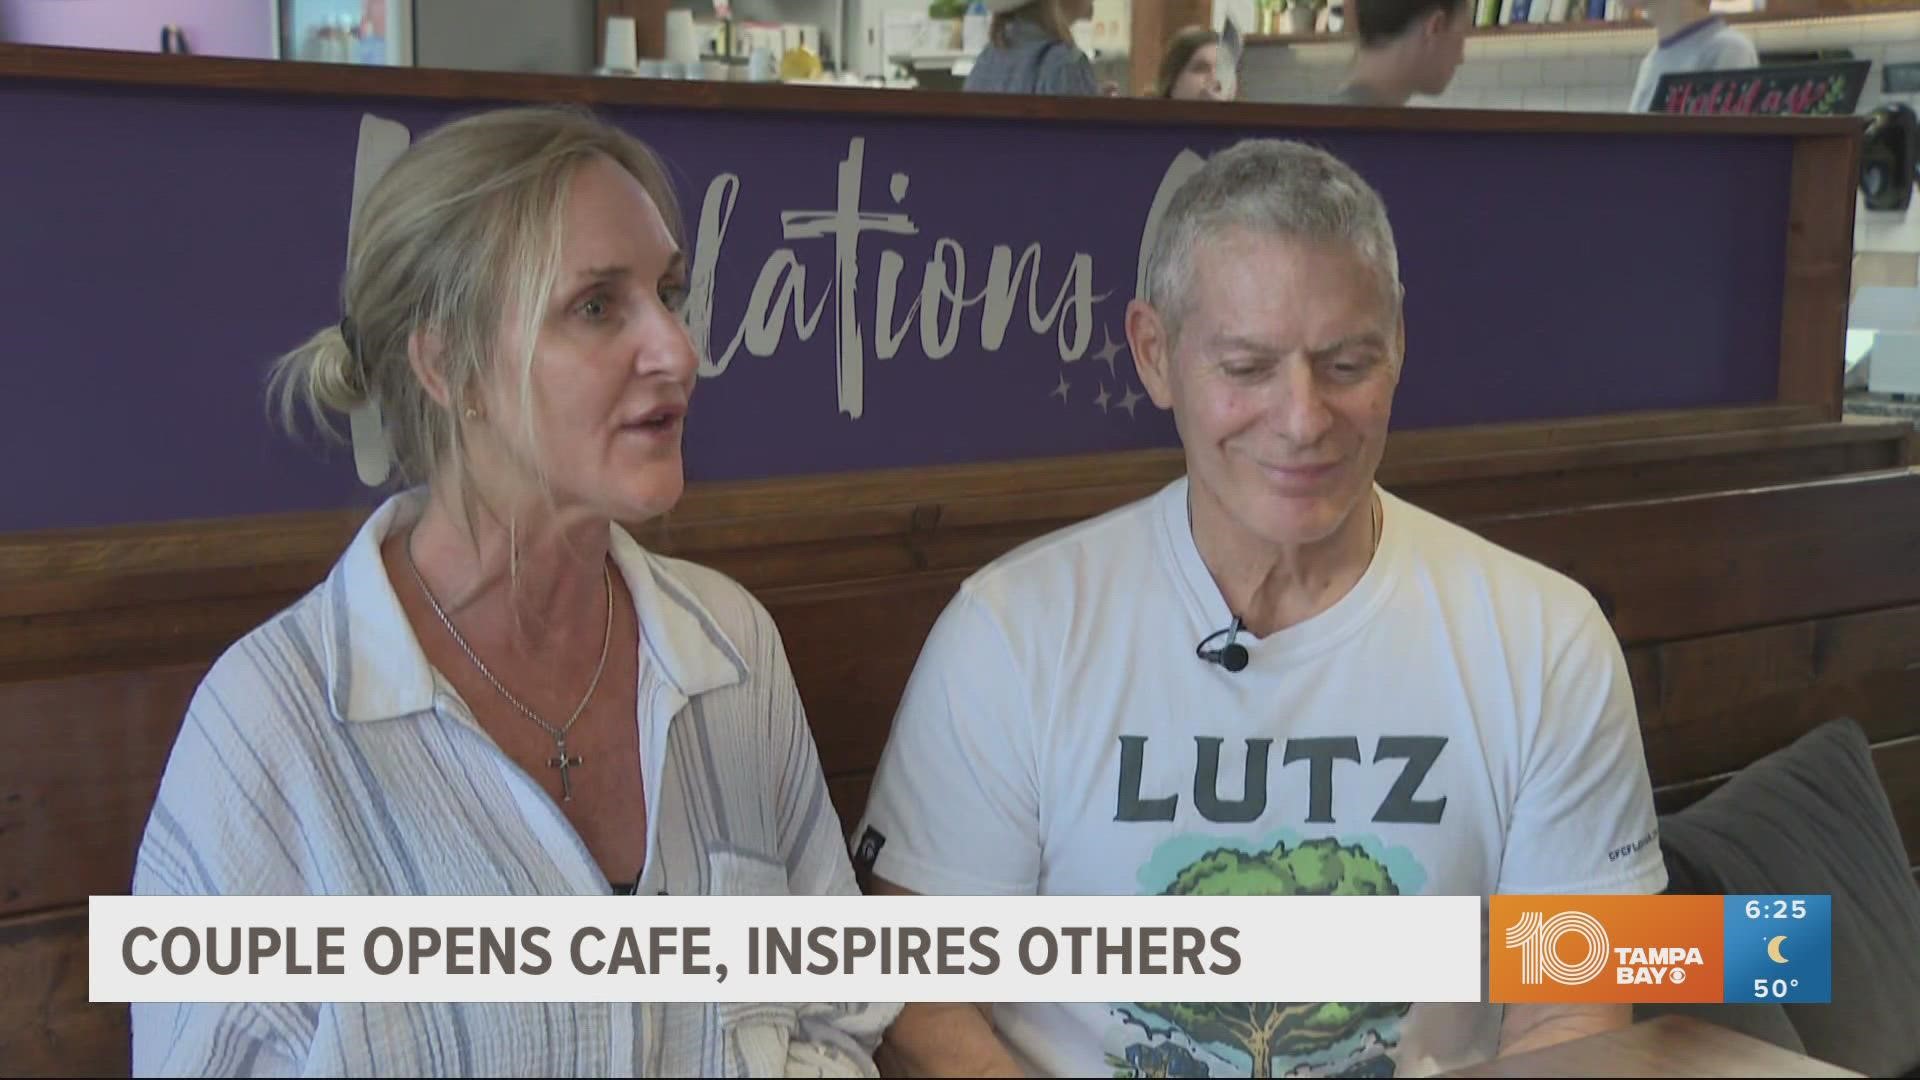 A couple shares the inspiring story of how they turned their lives around and came together to help others.